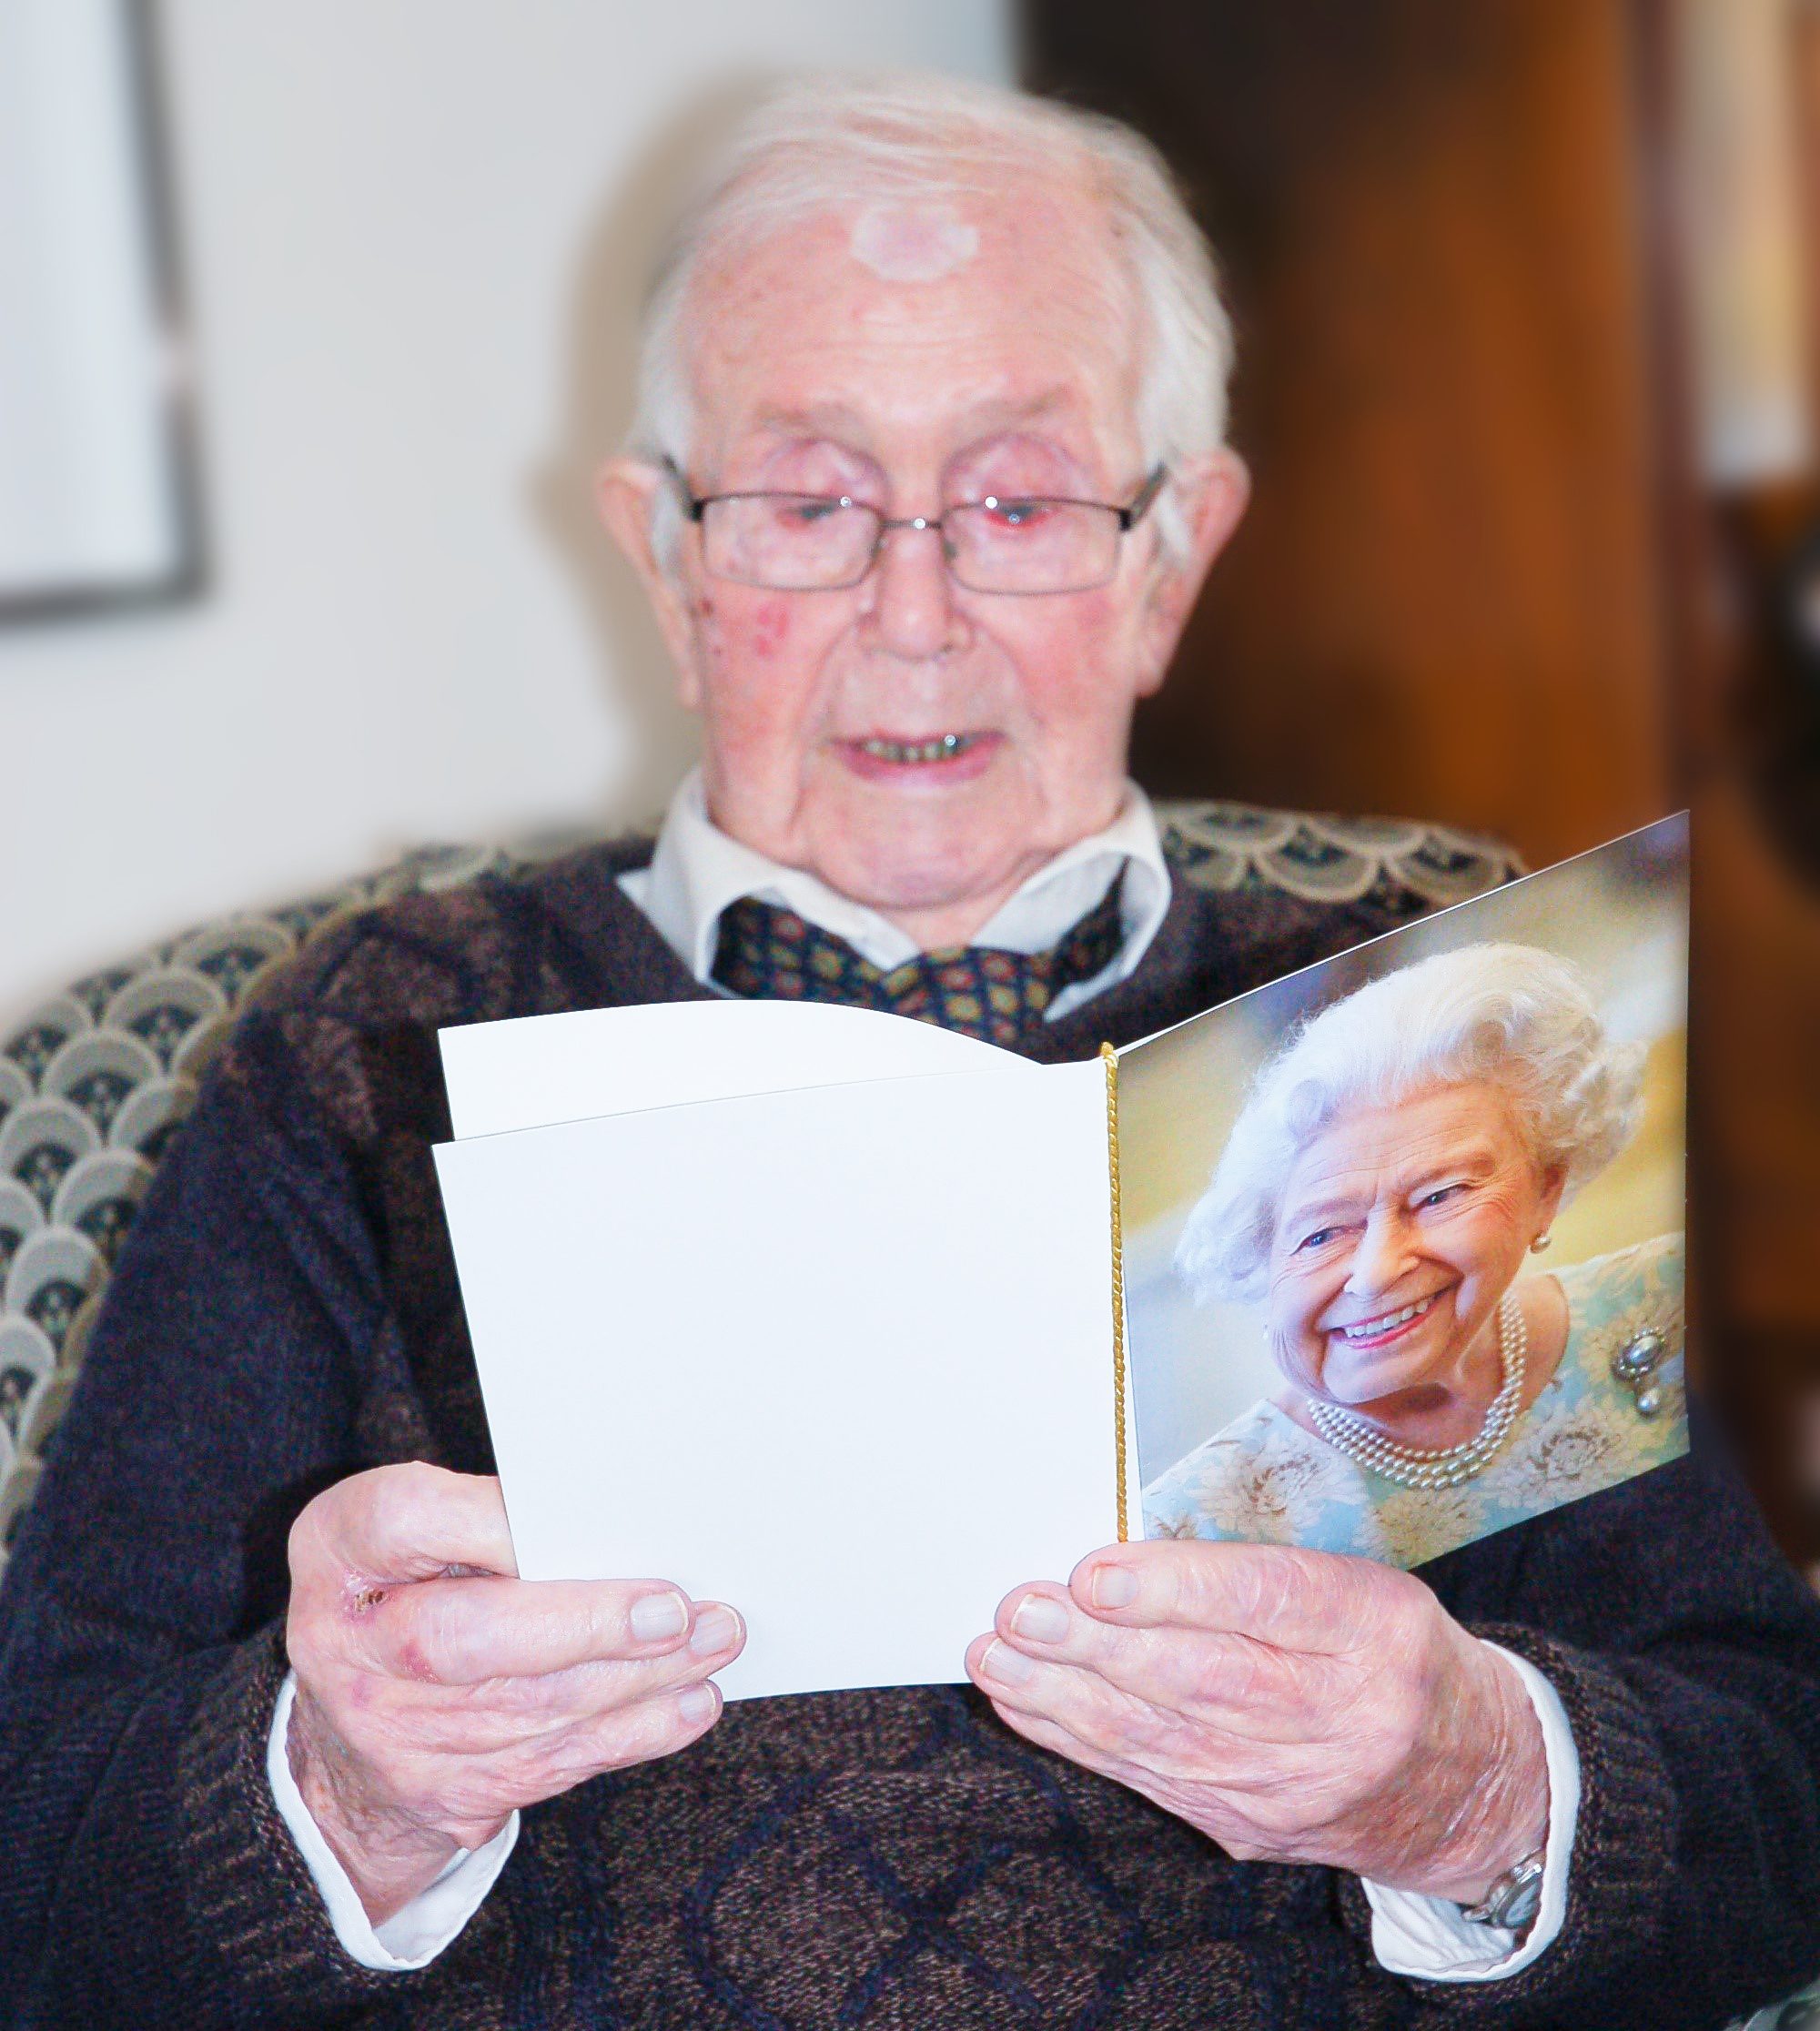 Queen's card being opened by Donald on his Birthday 